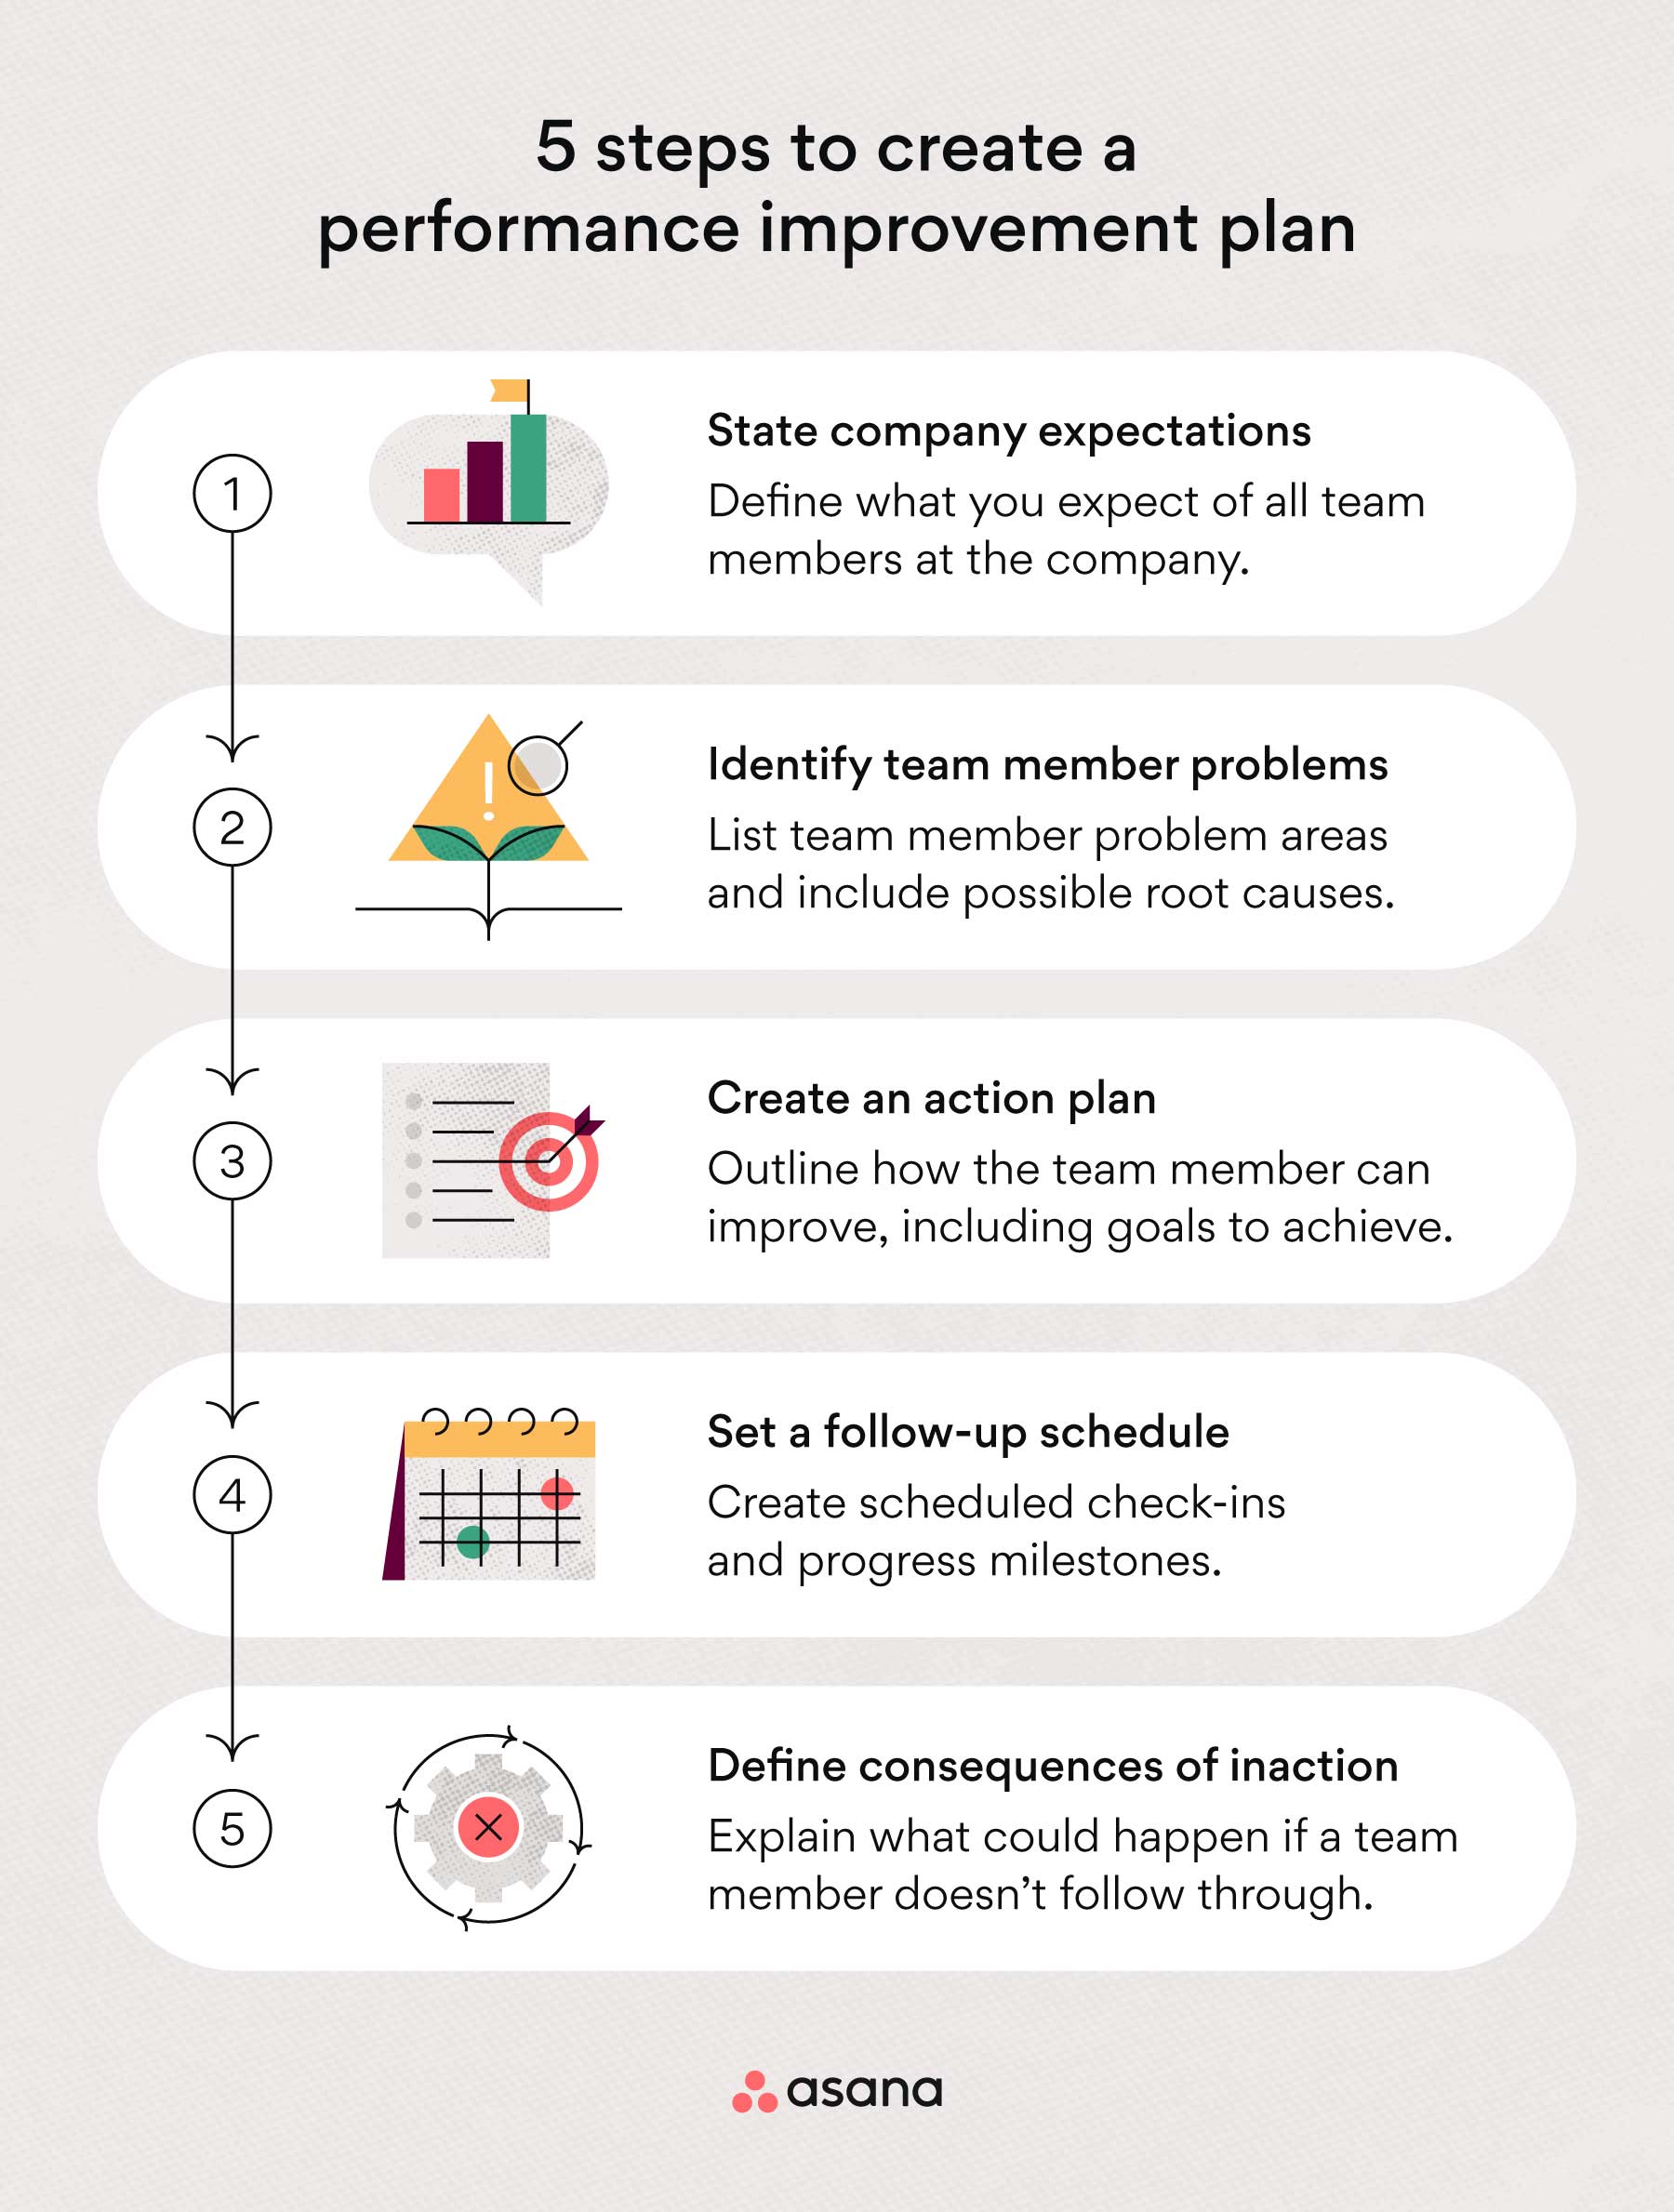 [inline illustration] 5 steps for create a performance improvement plan (infographic)